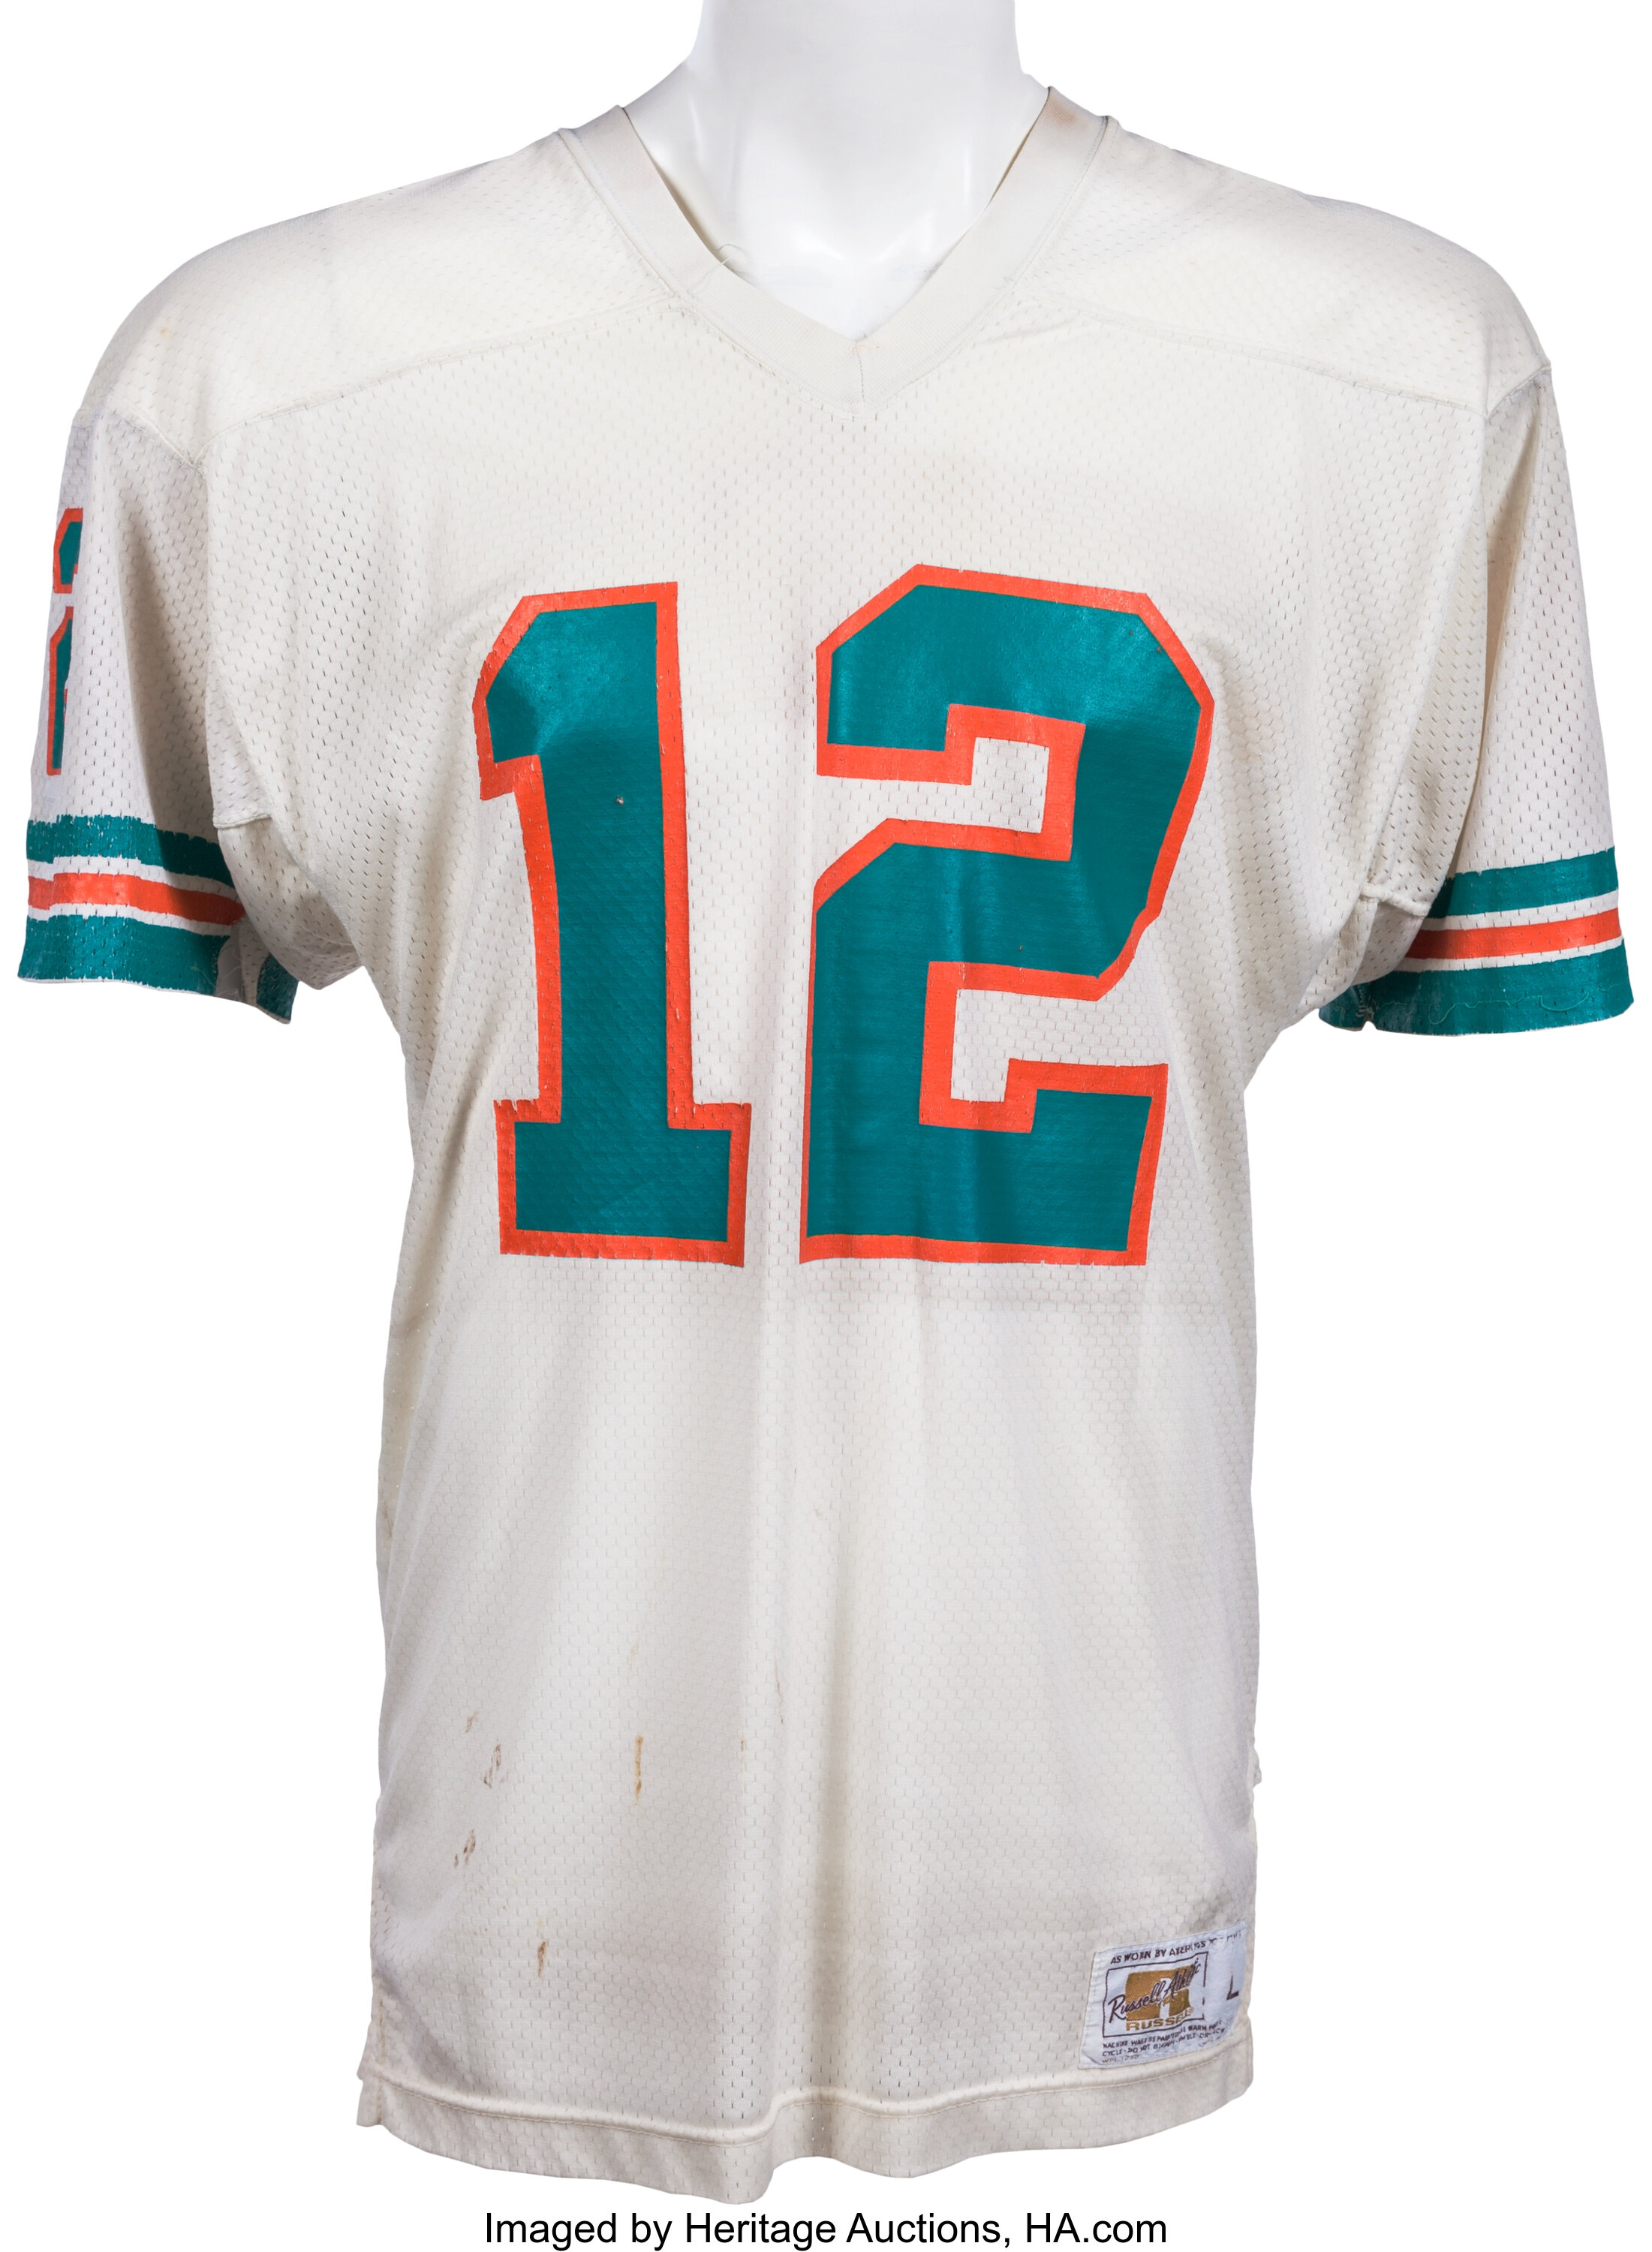 The Miami dolphins wear the wrong jersey for home games. IRL they